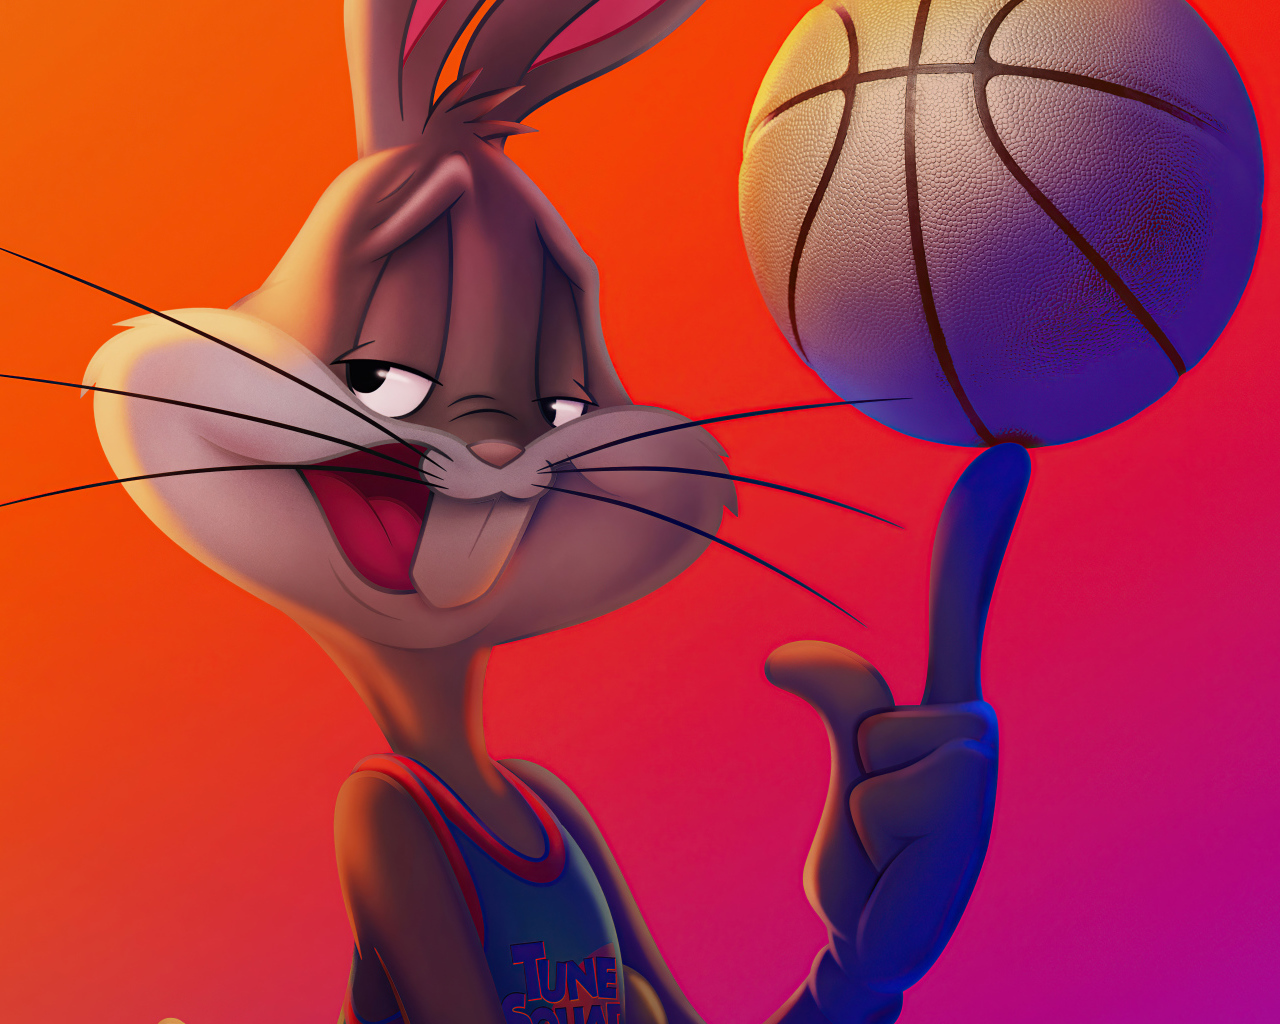 Bugs Bunny is a character in the new movie Space Jam. New generation, 2021